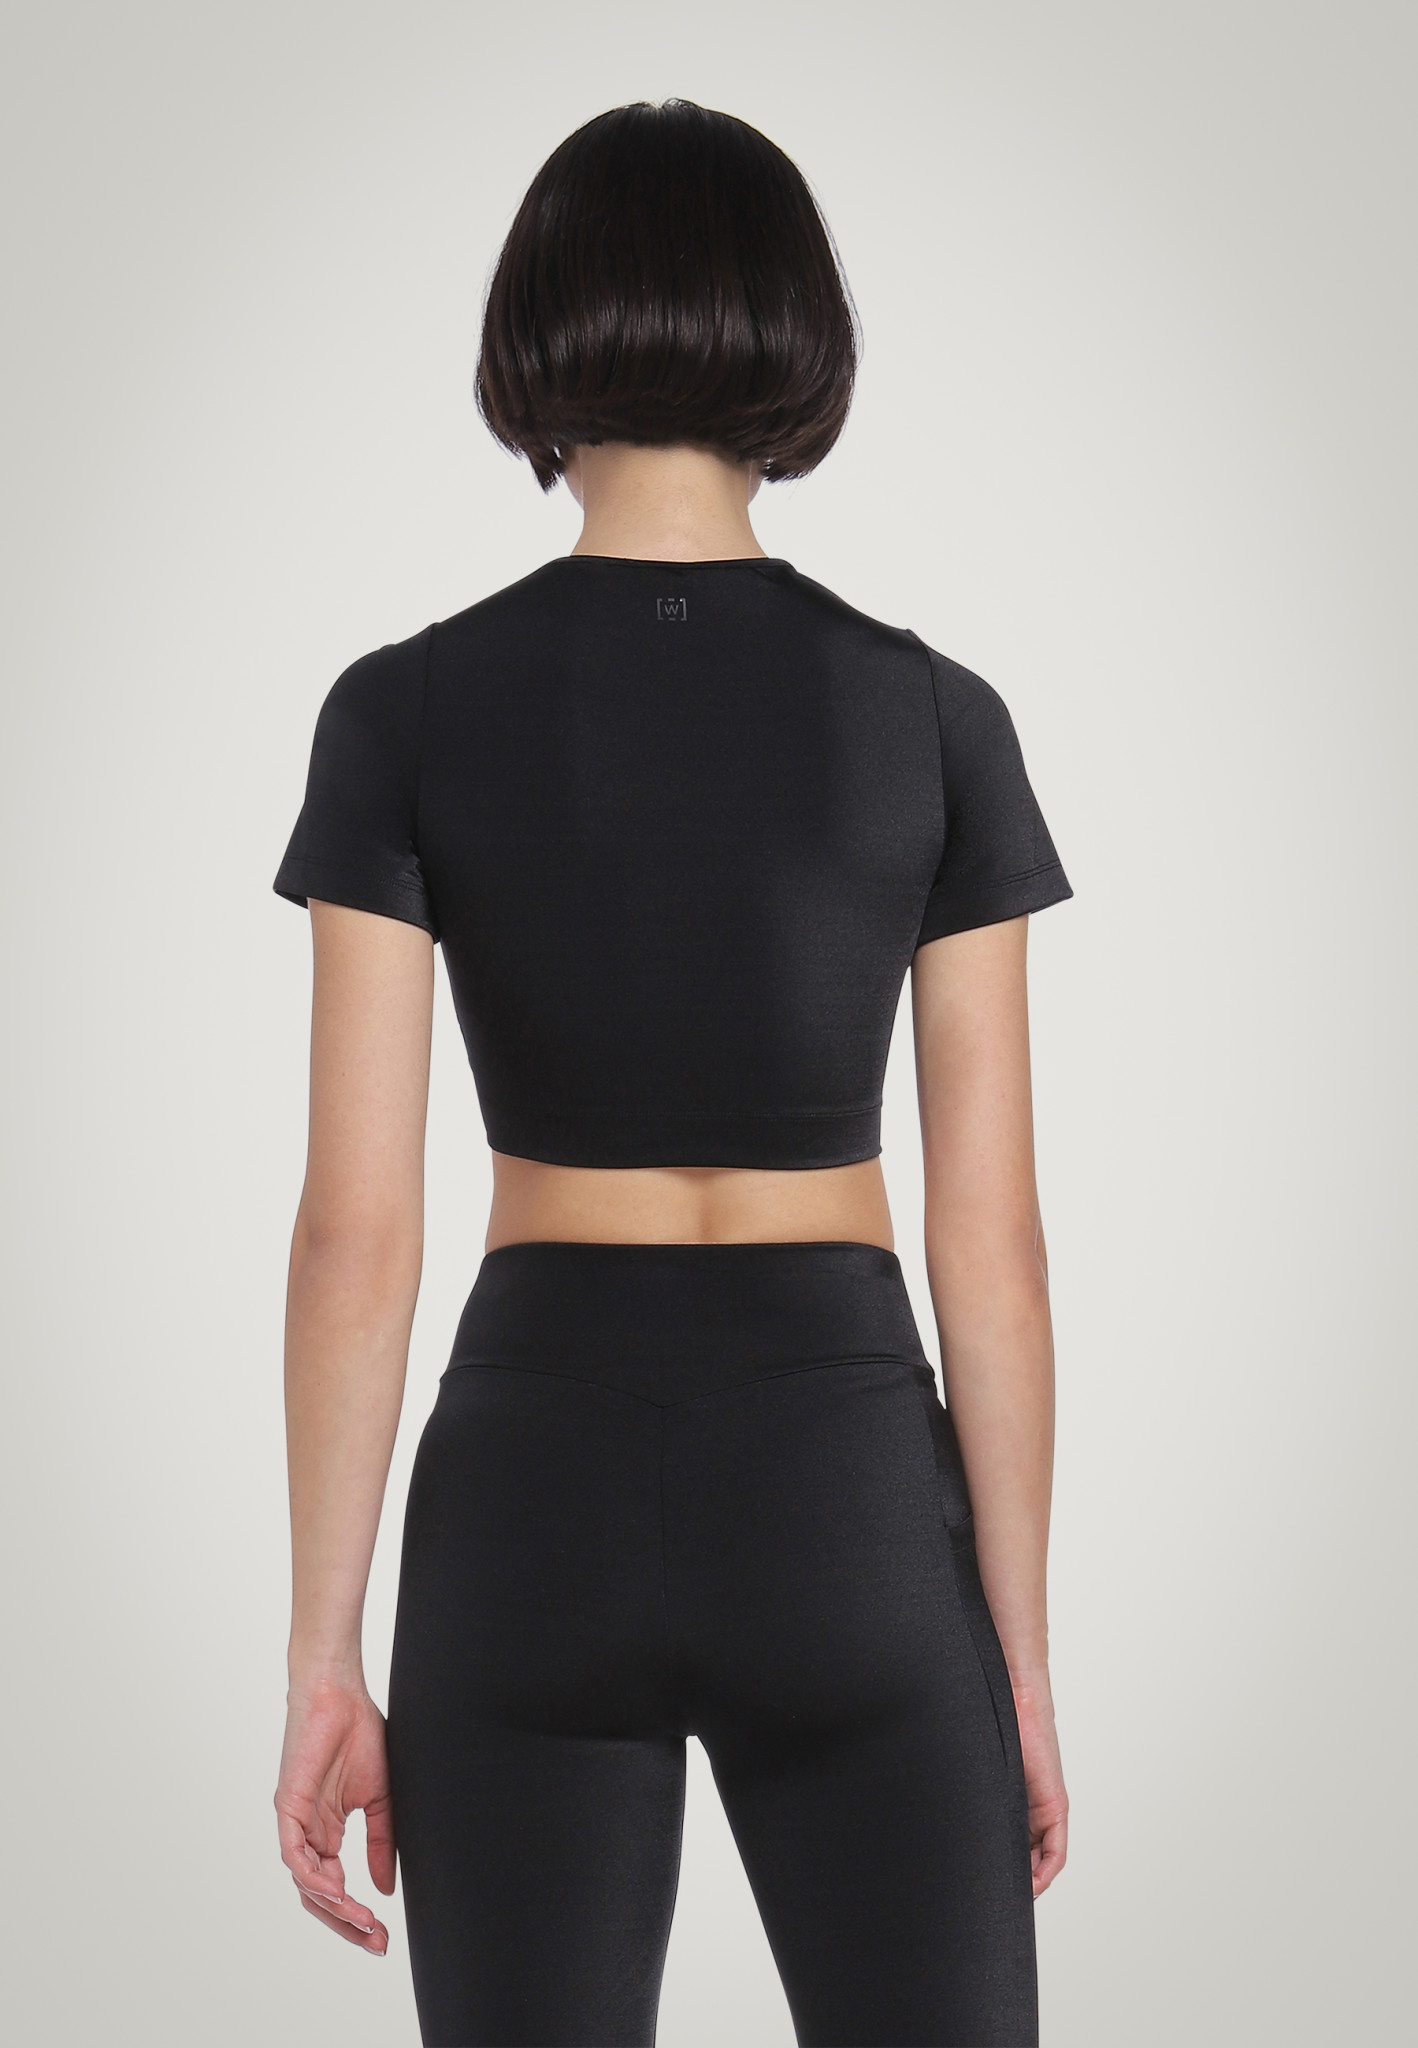 WOLFORD 52987 The Workout Top Short Sleeves